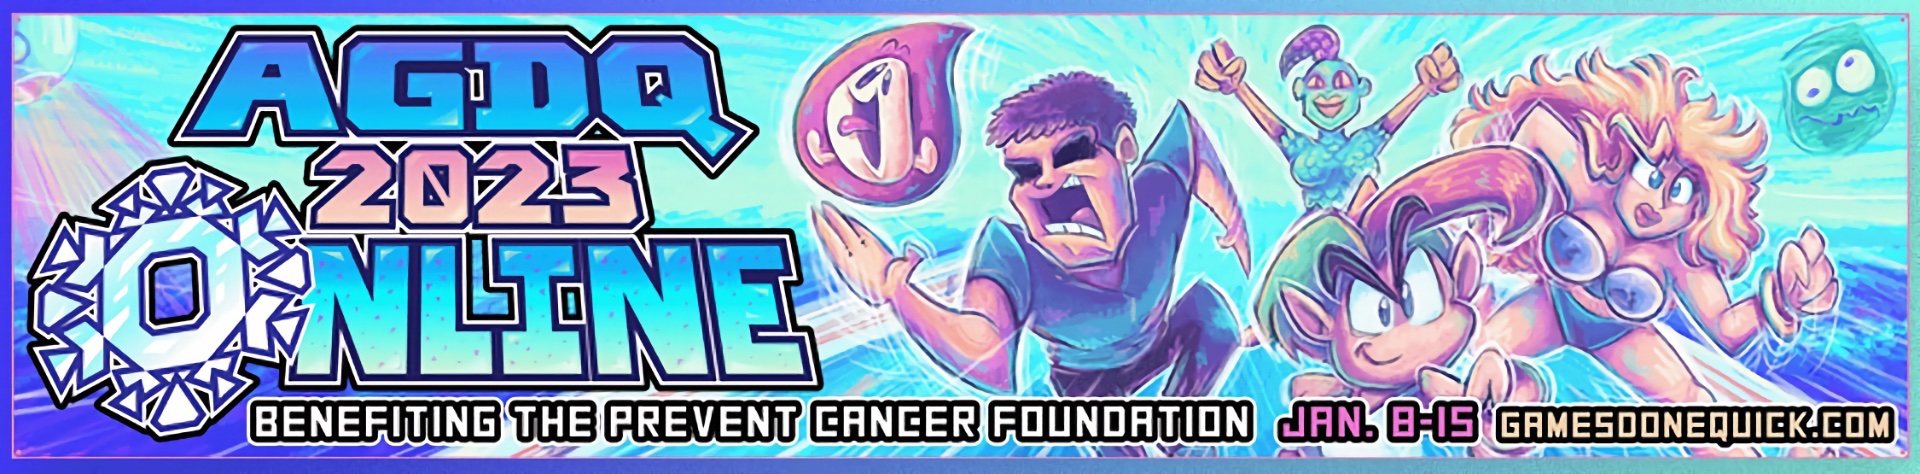 AGDQ Banner